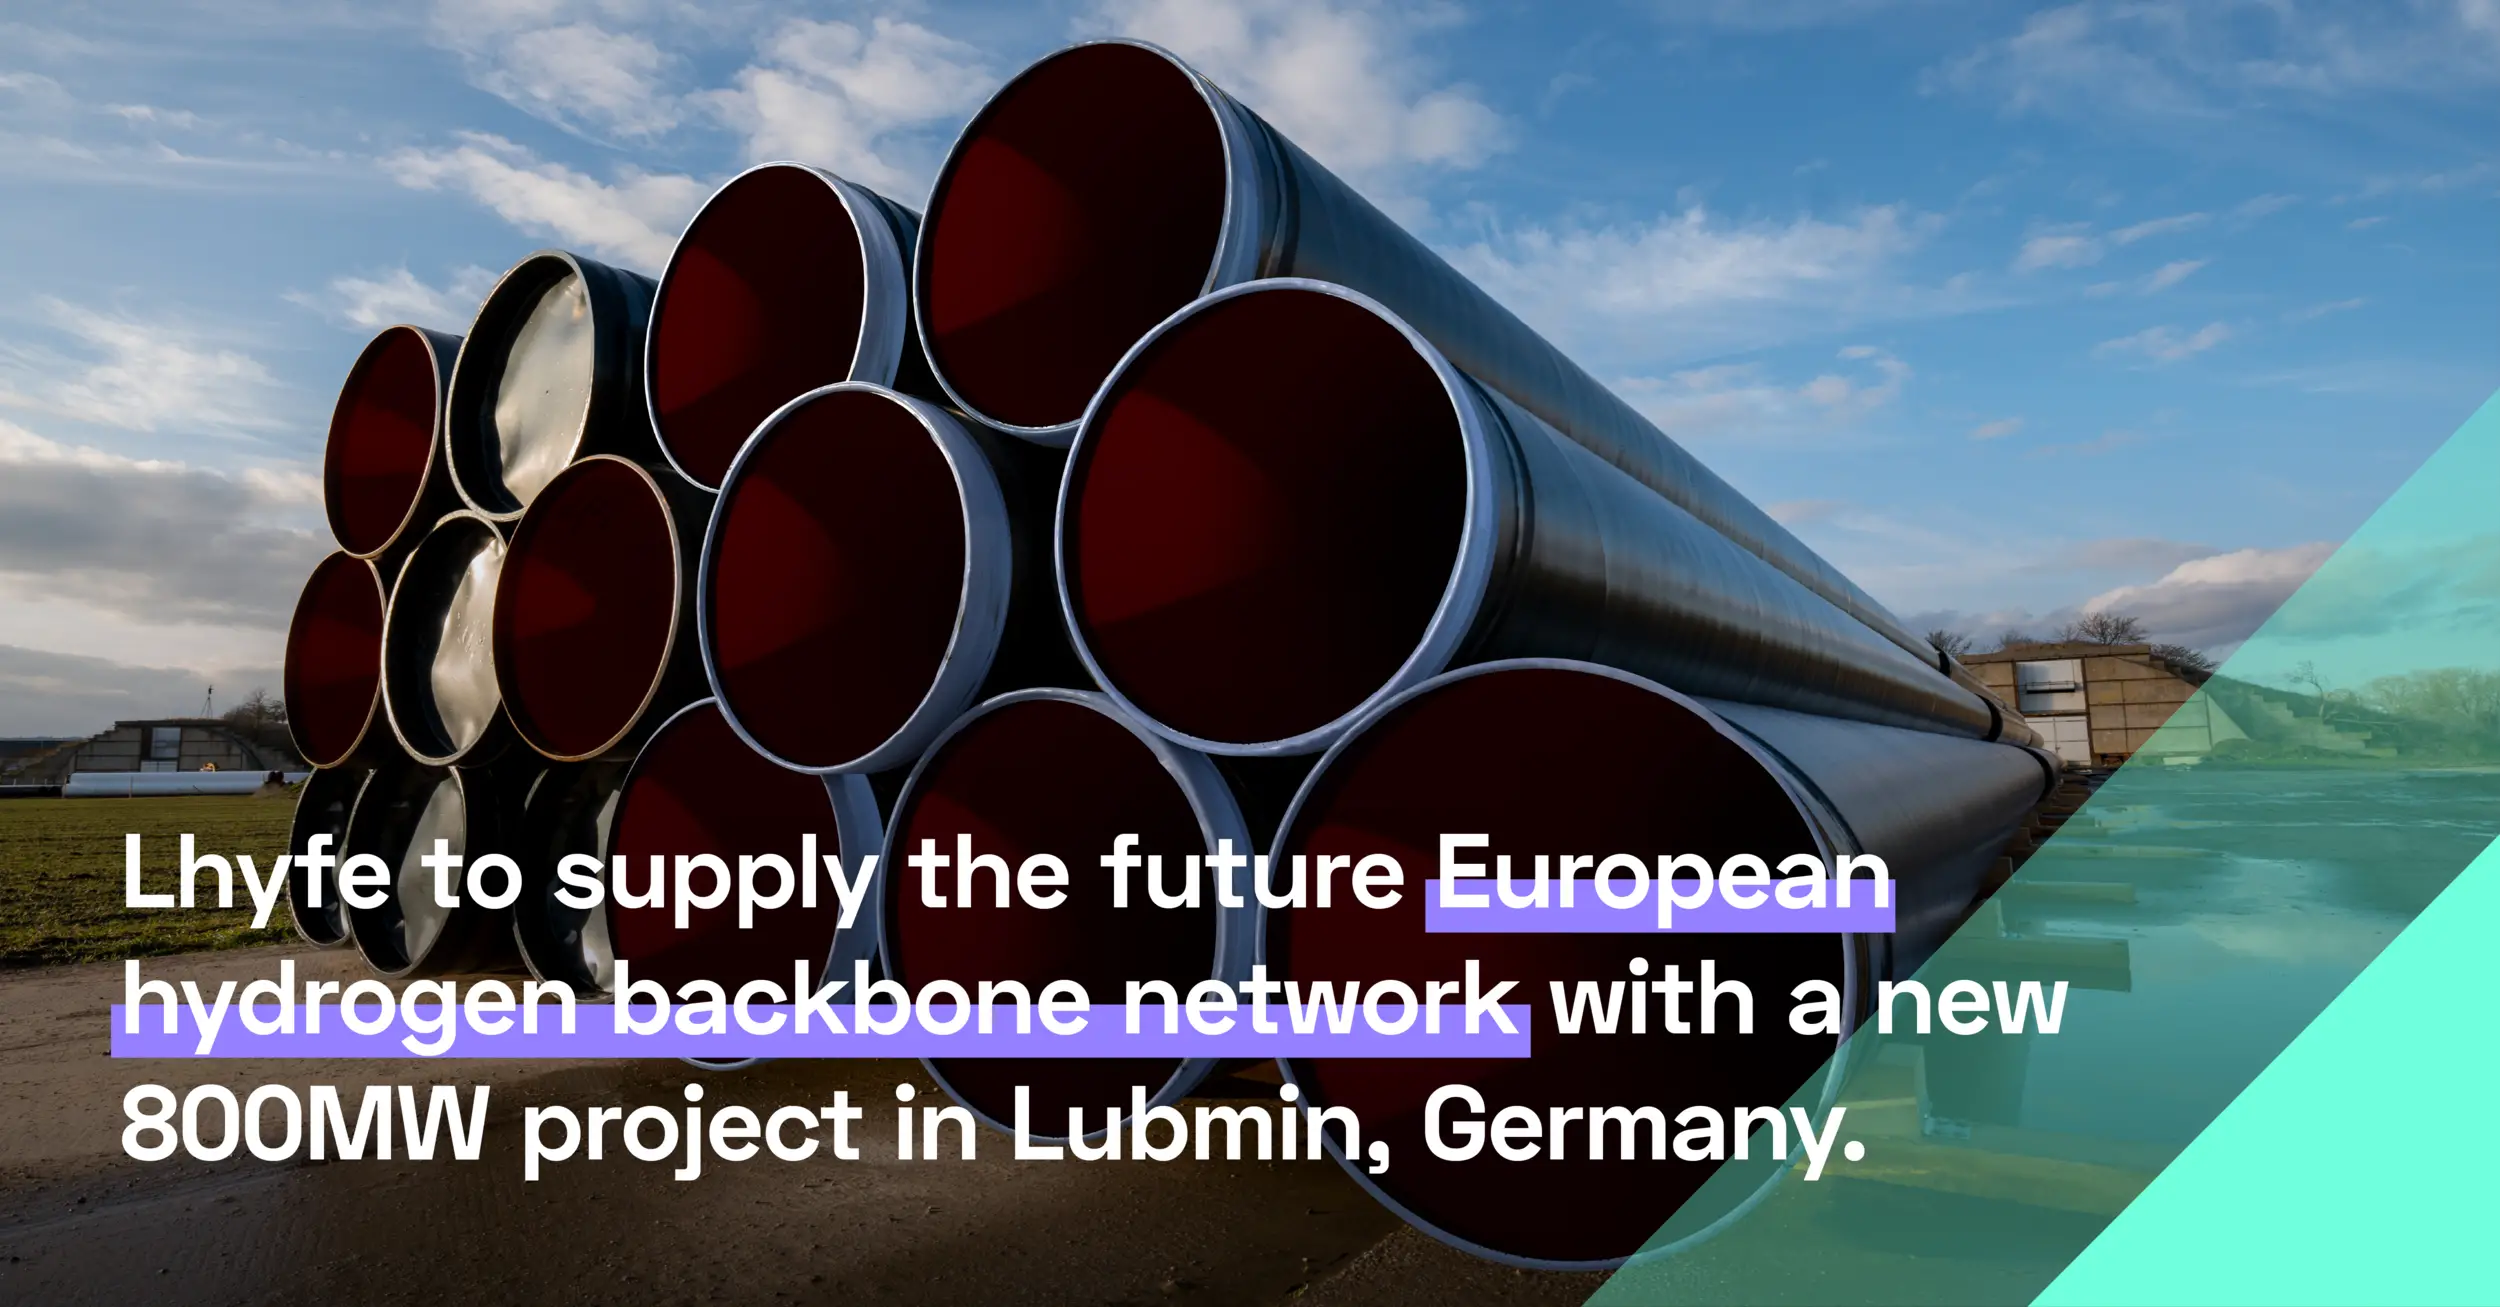 Lhyfe at the cutting edge of hydrogen strategies with a new 800MW project in Lubmin, Germany